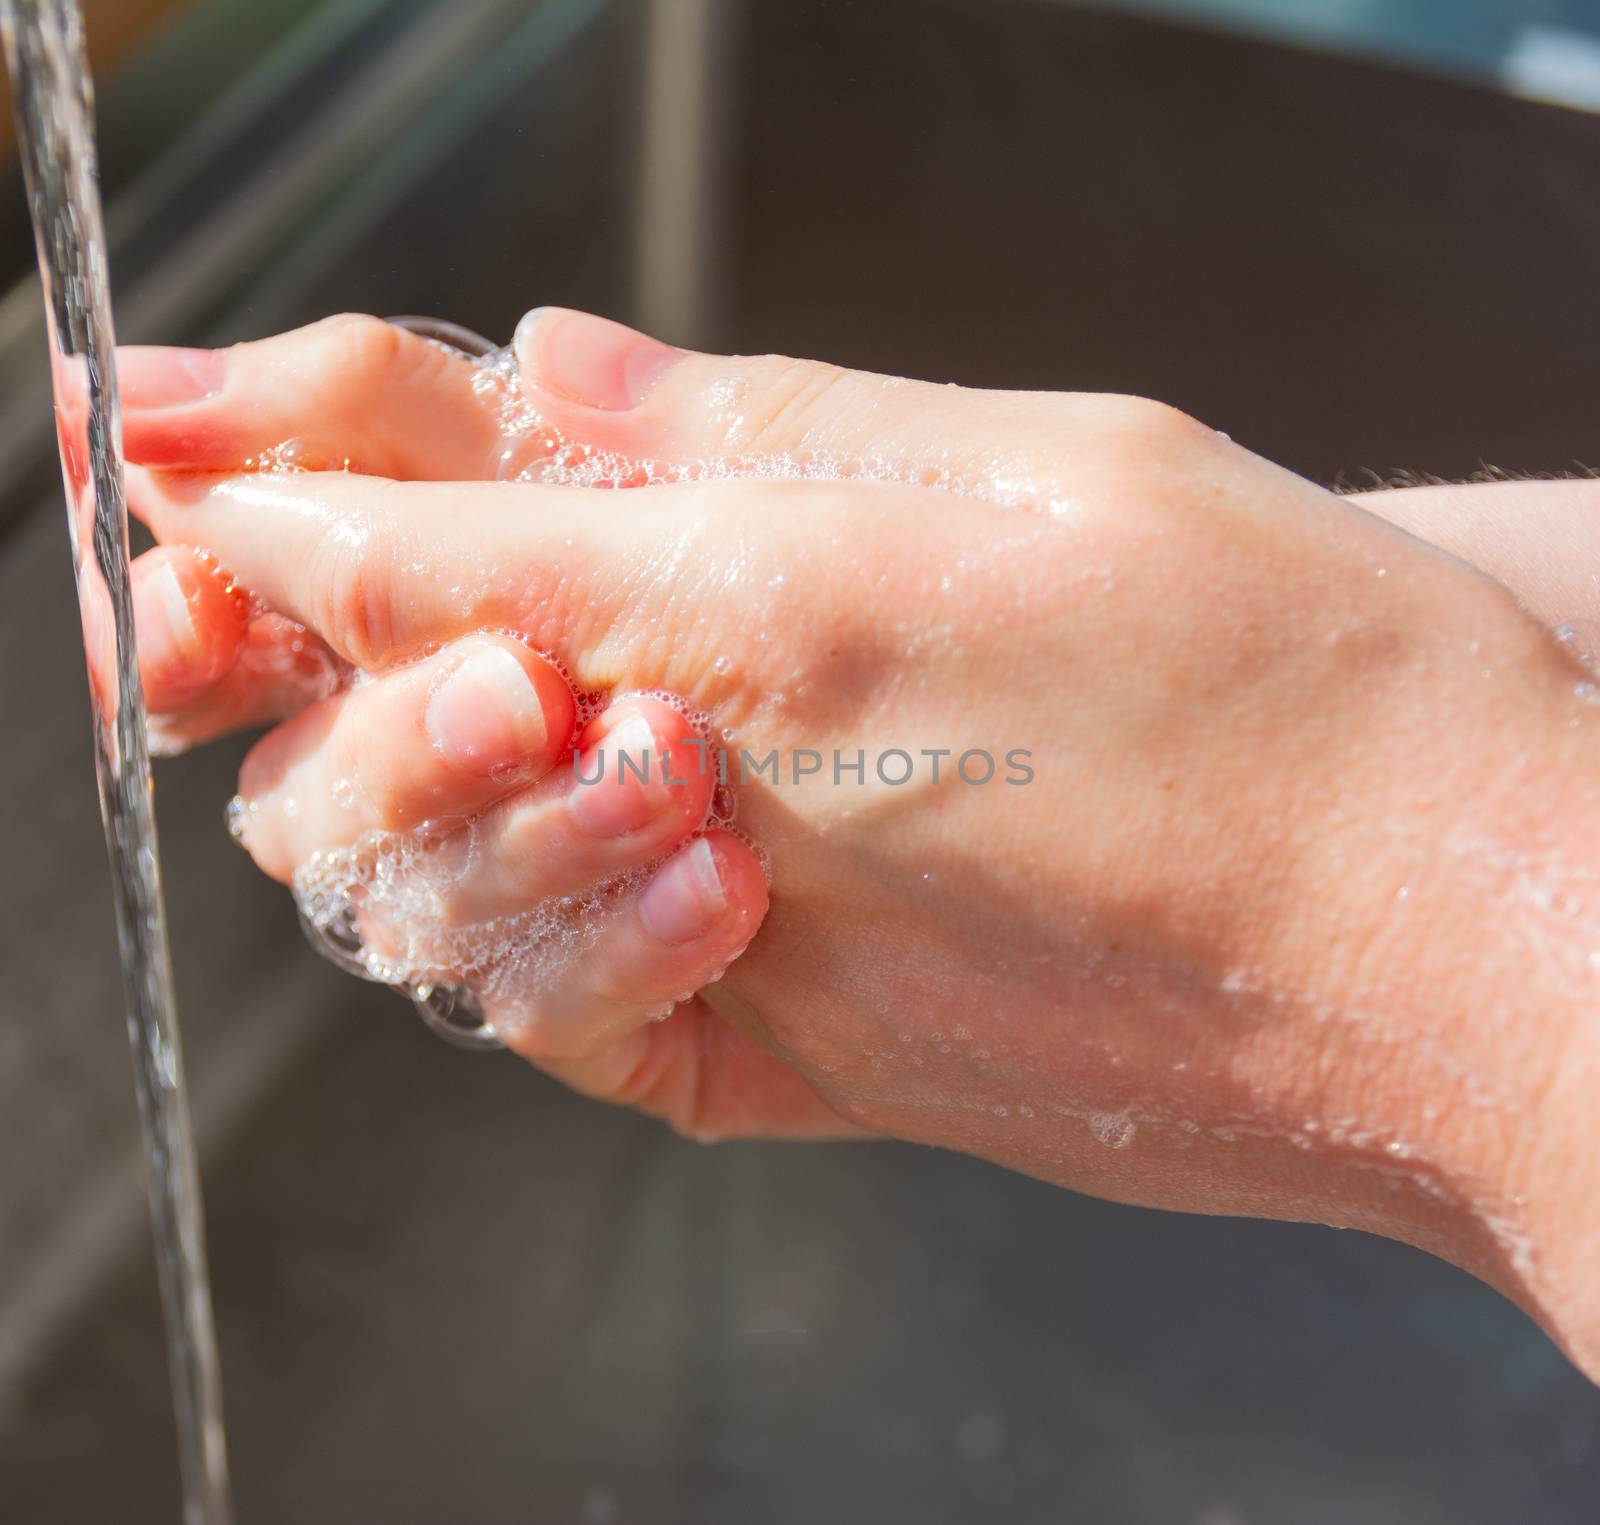 Woman washing hands with soap to prevent germs, bacteria and avoid coronavirus infections